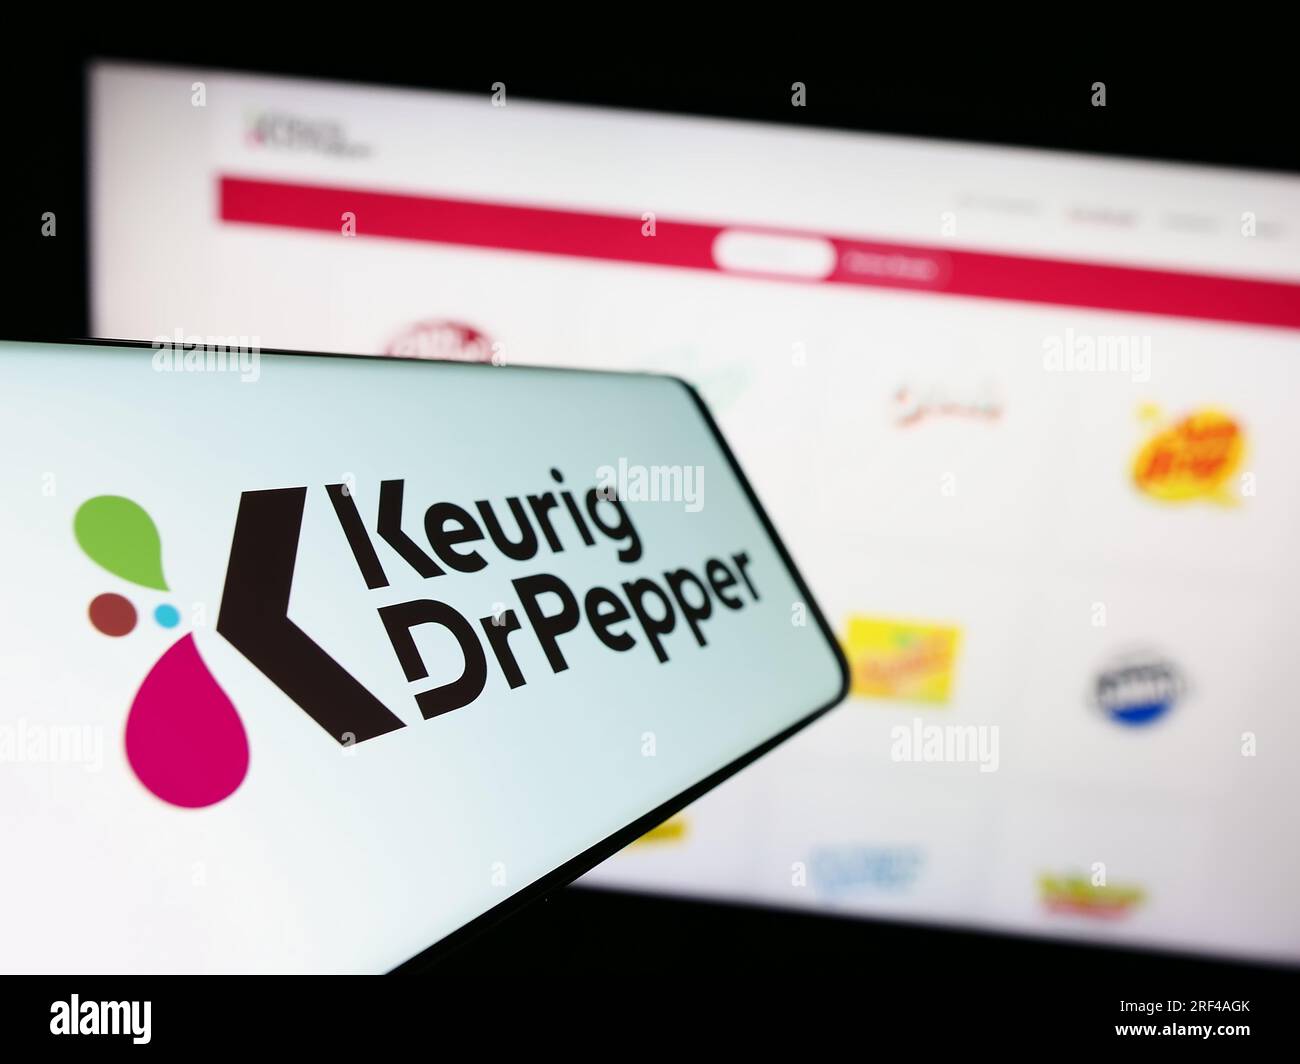 Smartphone with logo of American beverage company Keurig Dr Pepper Inc. on screen in front of website. Focus on center-left of phone display. Stock Photo